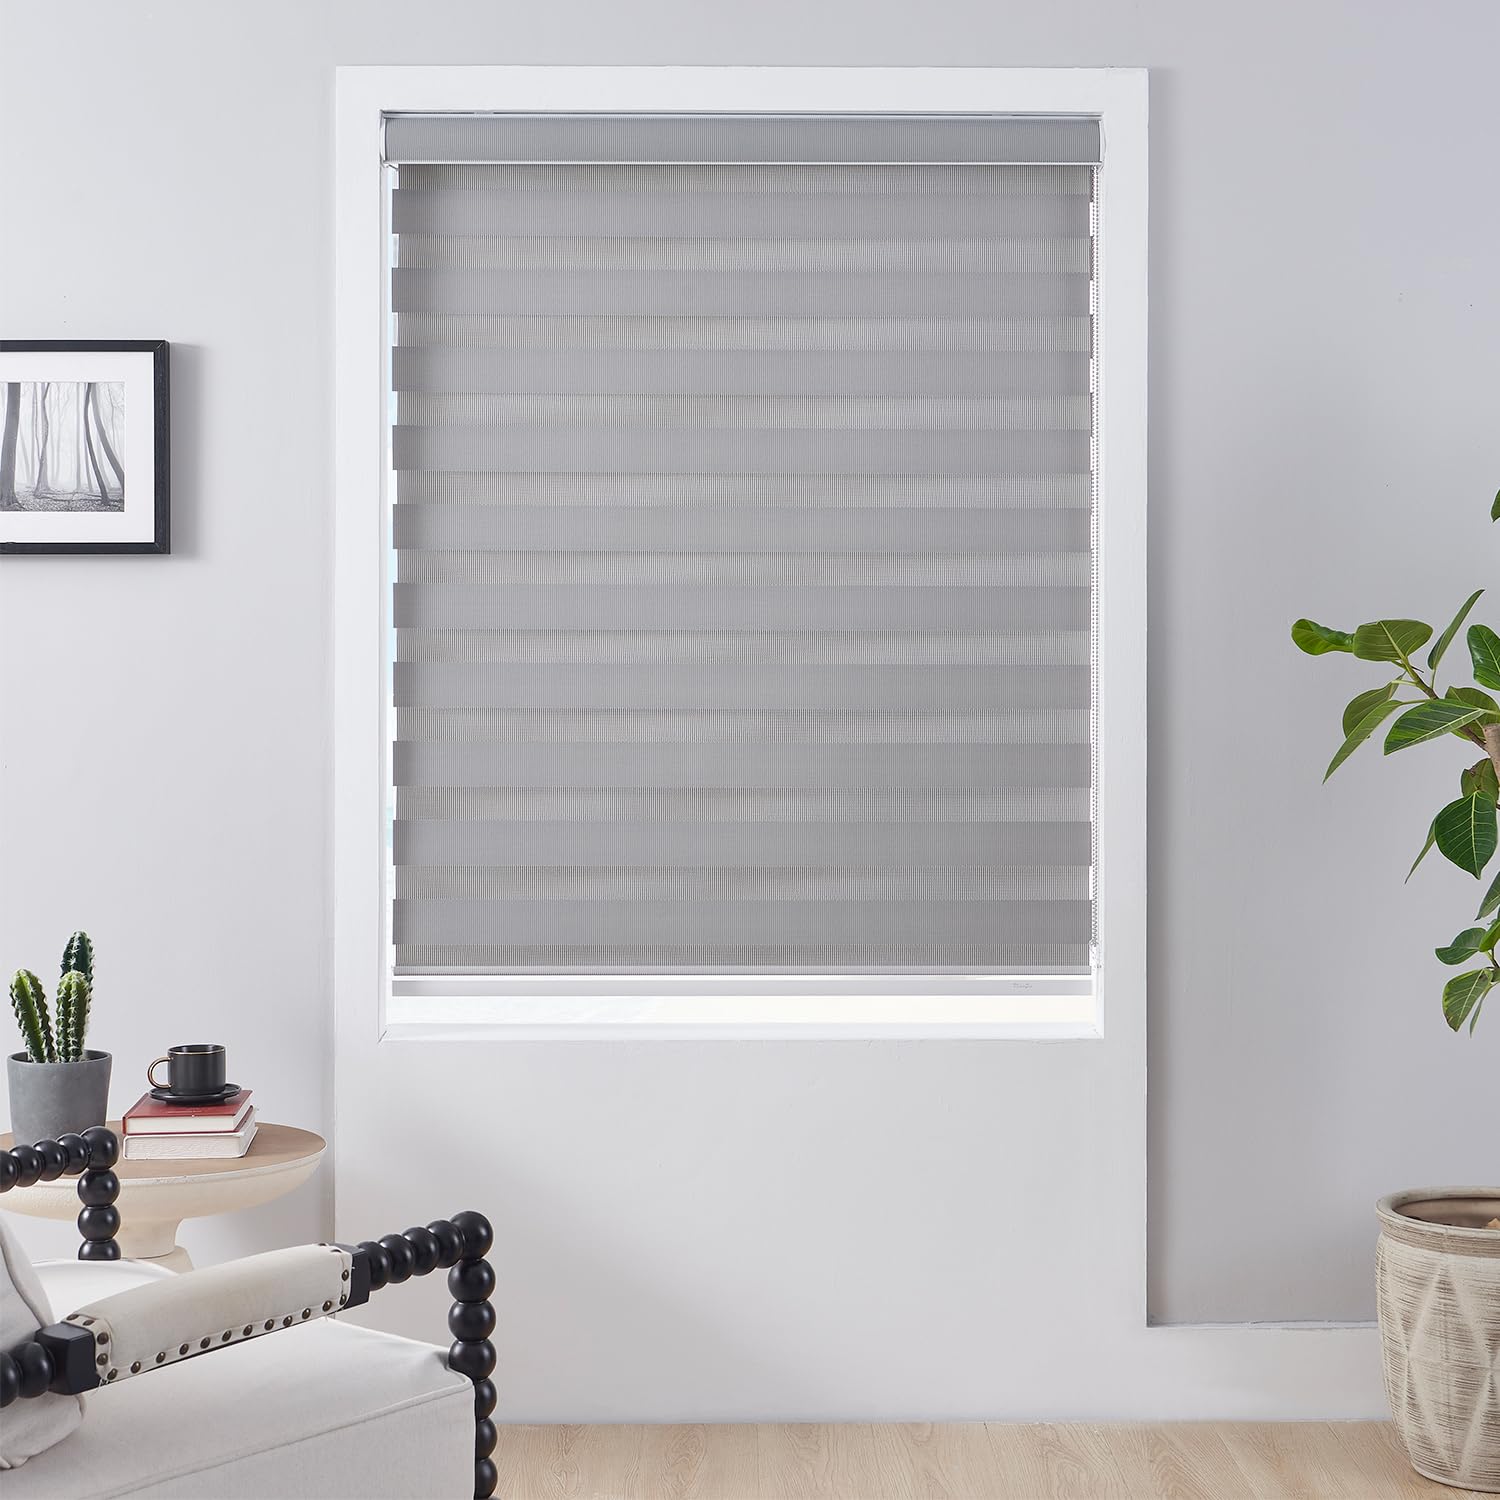 Blackout-Day-and-Night-Dual-Zebra-Blinds